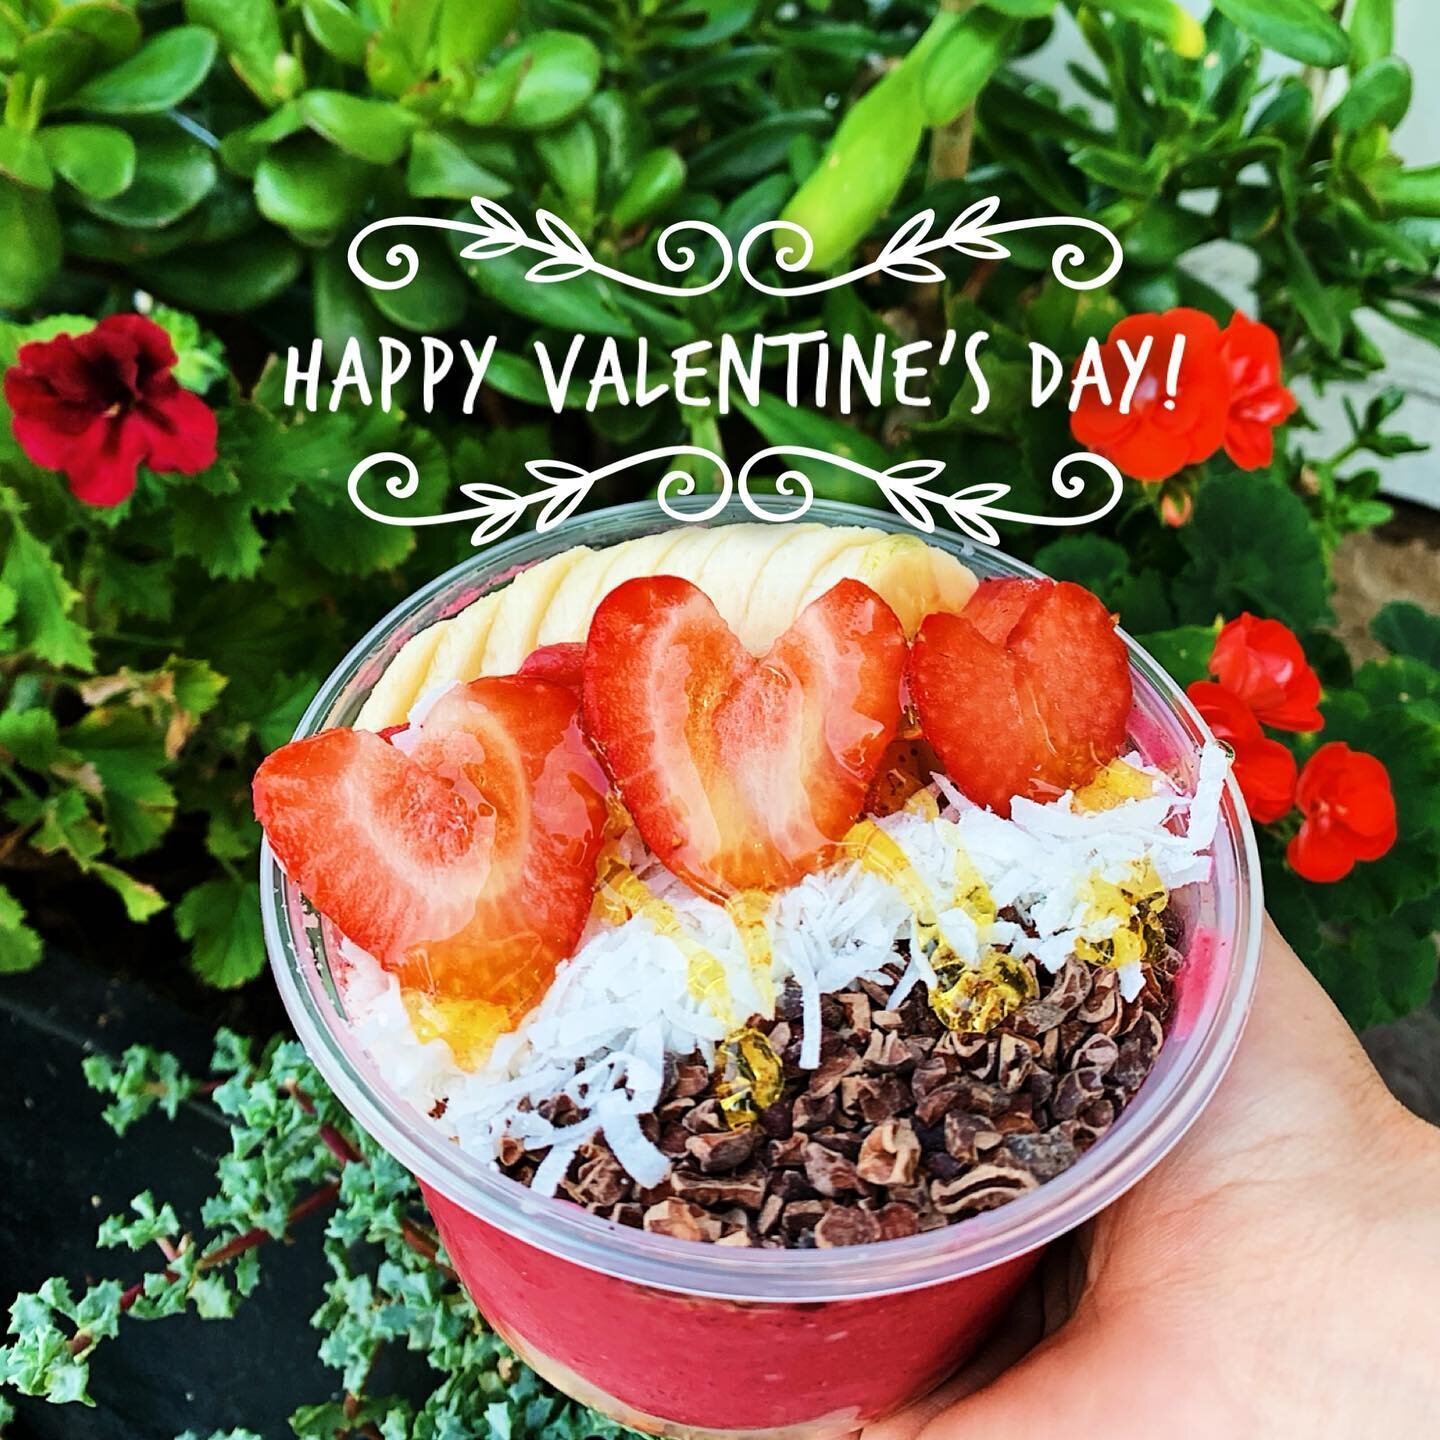 Happy Valentine&rsquo;s Day from High Tide! It&rsquo;s more important than ever to spread the love! Drop by and share your favorite sandwich, wrap, açai bowl, smoothie, or espresso drink with the one you love! Or try our new Valentine&rsquo;s Day Bo